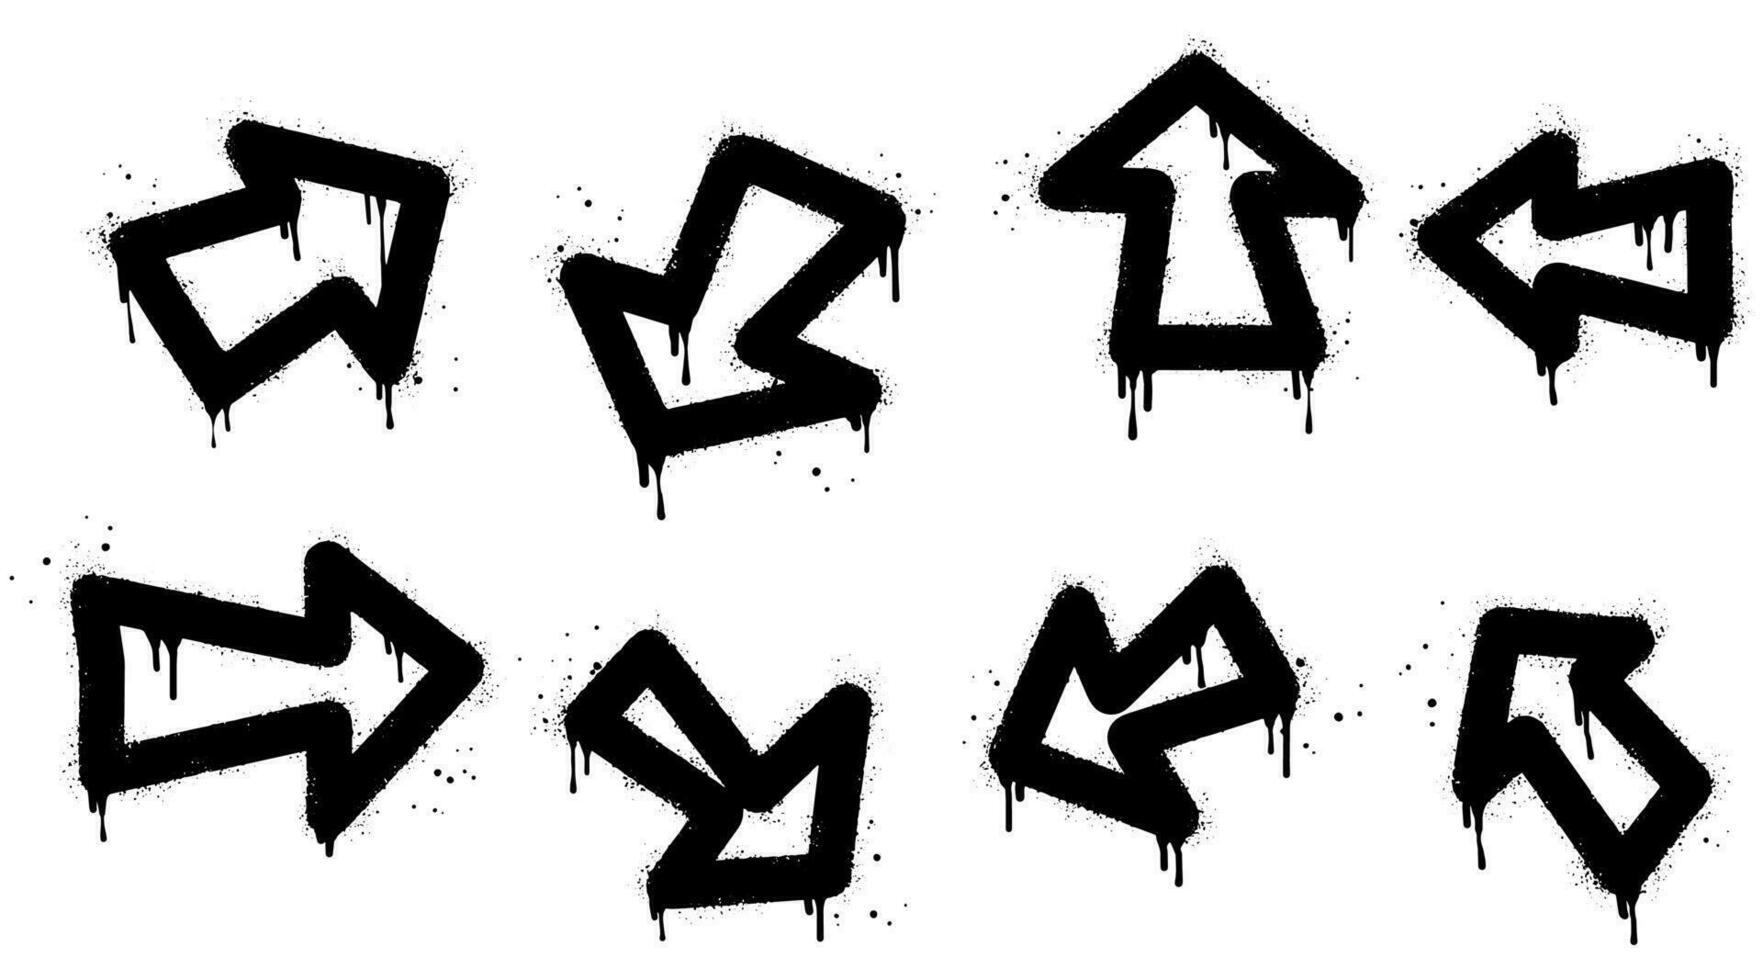 collection of Spray painted graffiti Arrow in black over white. isolated on white background. vector illustration